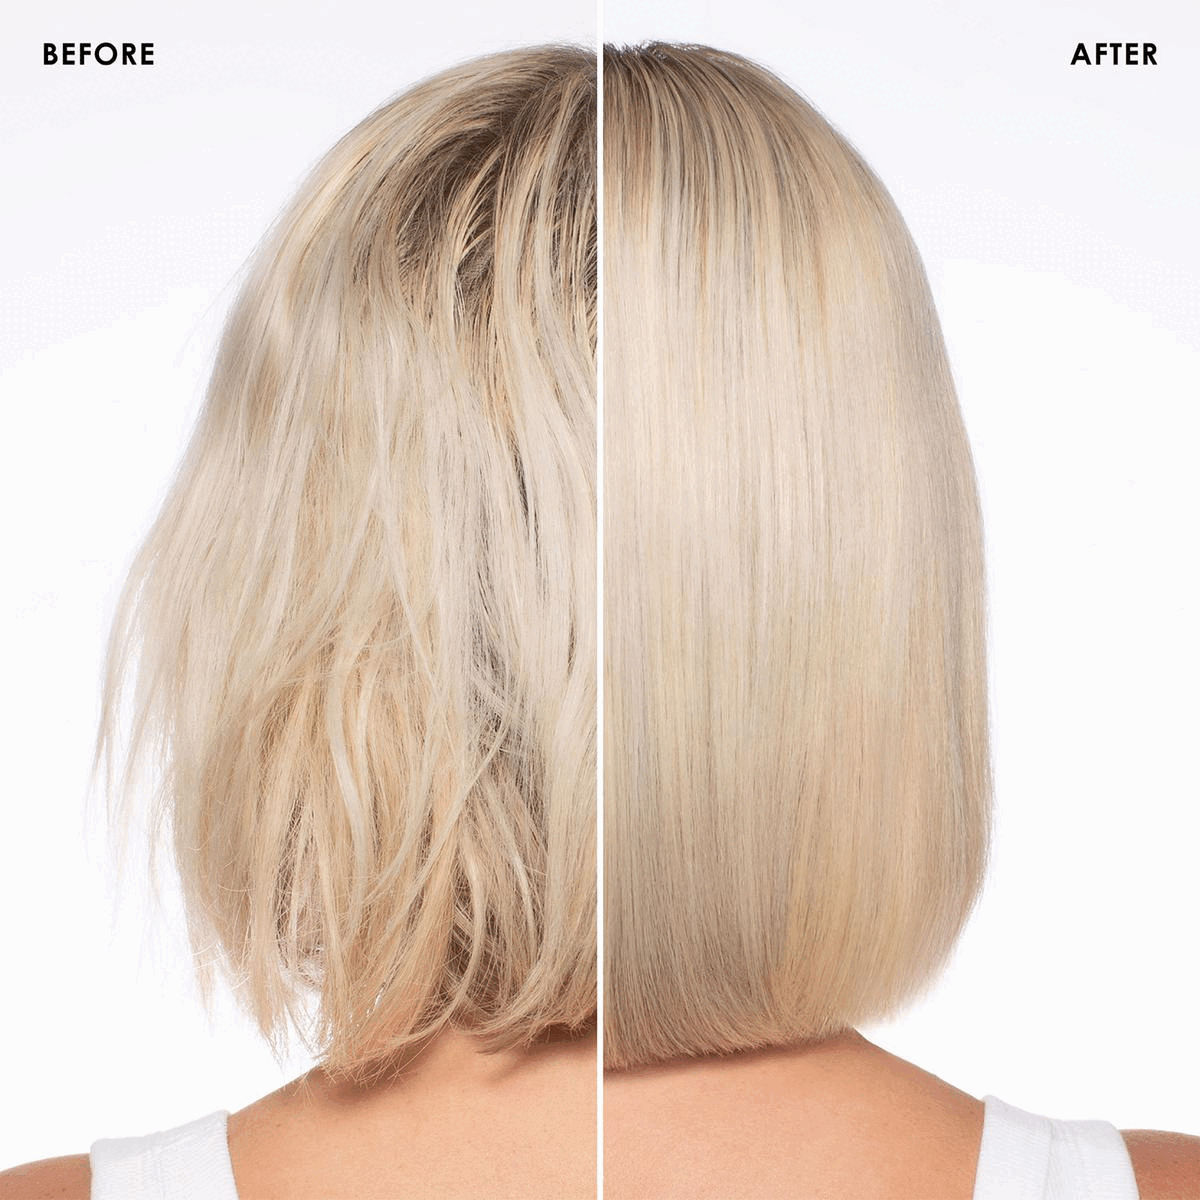 Image 1- Before/After.Image 2-Before/After. Image 3-SATIN SHINE STYLE MEMORY, BOUNCEBACK CURLS, ANTI-TANGLE, ANTI-STATIC,HEAT PROTECTION UP TO 450°F. Image 4- Hair cuicle before/after. Image 5-THE ENVIRONMENT COMES FIRST,Together with our updated carbon negative footprint from 2015 to 2021,We ELIMINATE, We SAVE, WE PROTECT, 35mm, 44k, 57mm, Pounds of GHG from being emitted to the environment,Gallons of water from being wasted, Trees from being deforested. Image 6-All Hair Types PH Balanced, Vegan, Cruelty Free, Gluten Free, Nut Free, Paraben Free, Phthalates Free, Phosphate Free, Sulfate Free